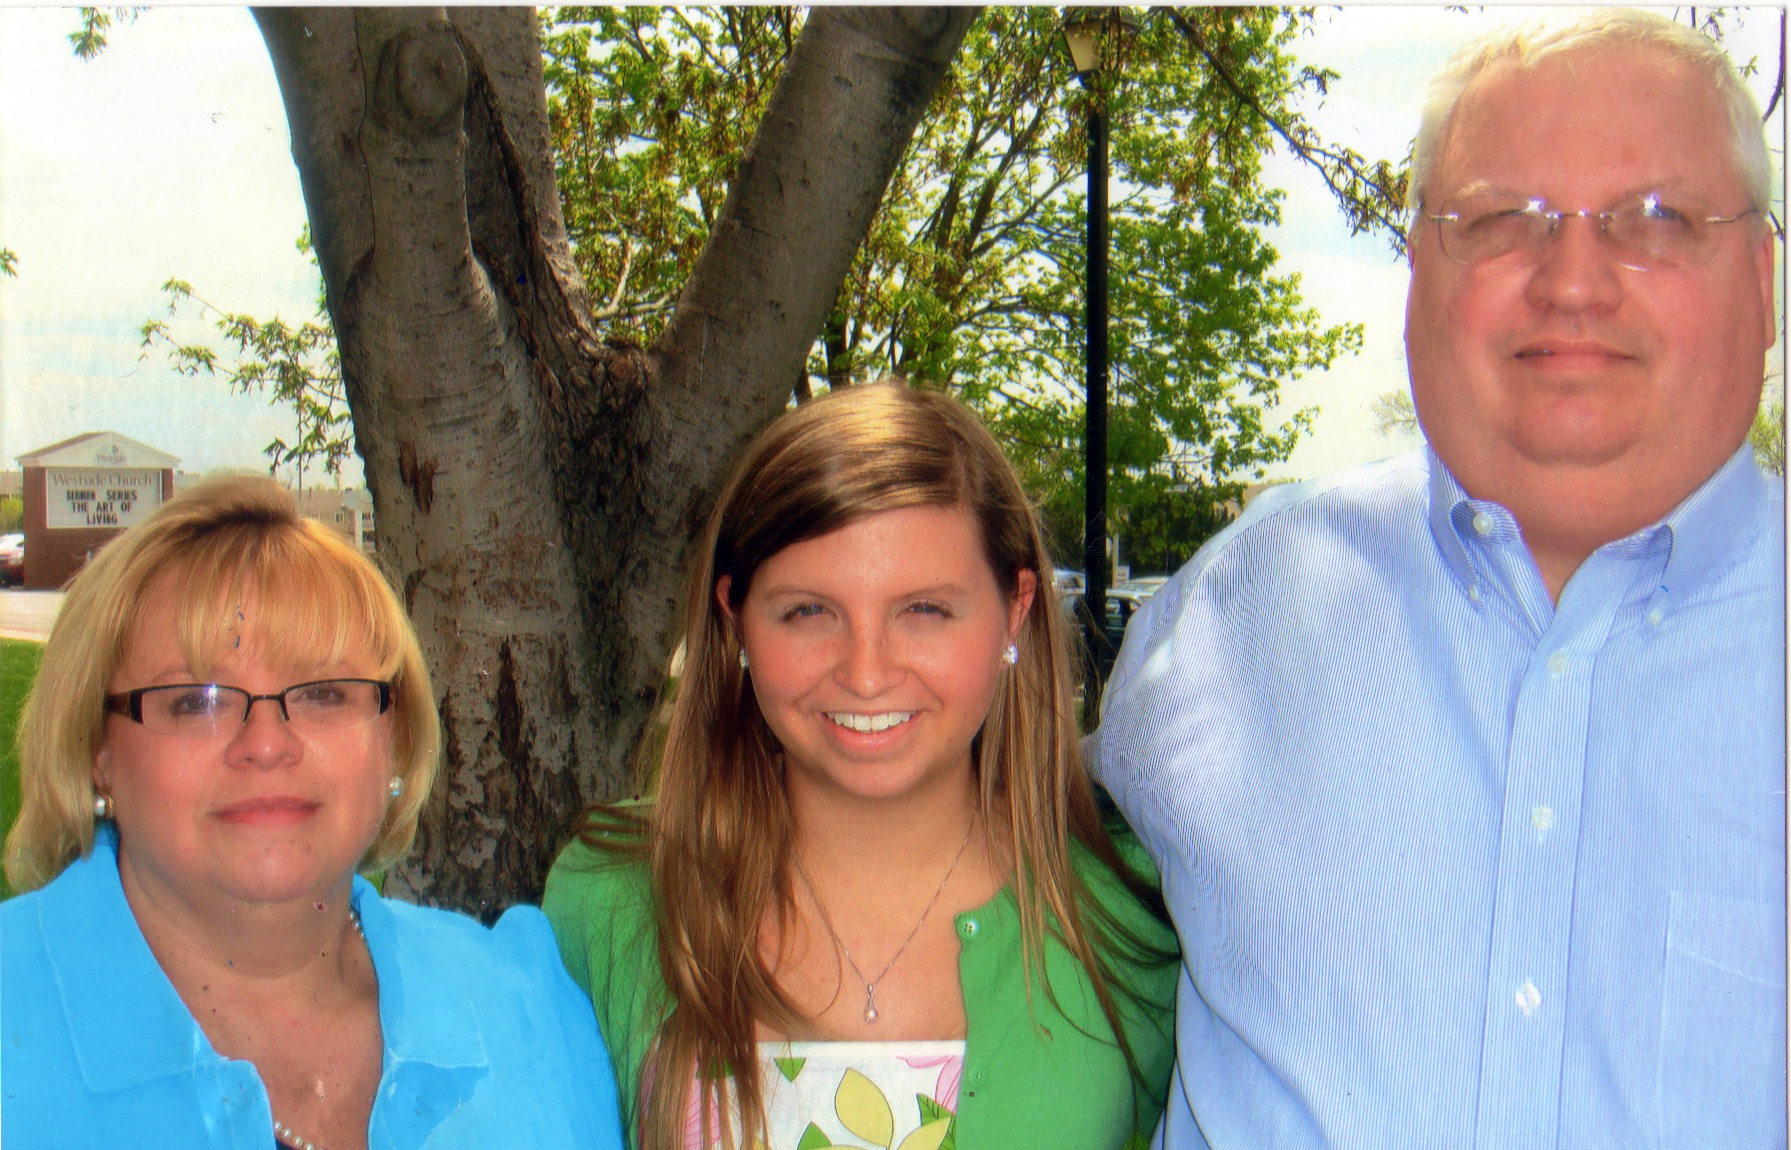 PHOTO: Eric Boyles (right) lost his wife Hollie Boyles (left) and daughter Shelby Boyles (center) in a car accident.